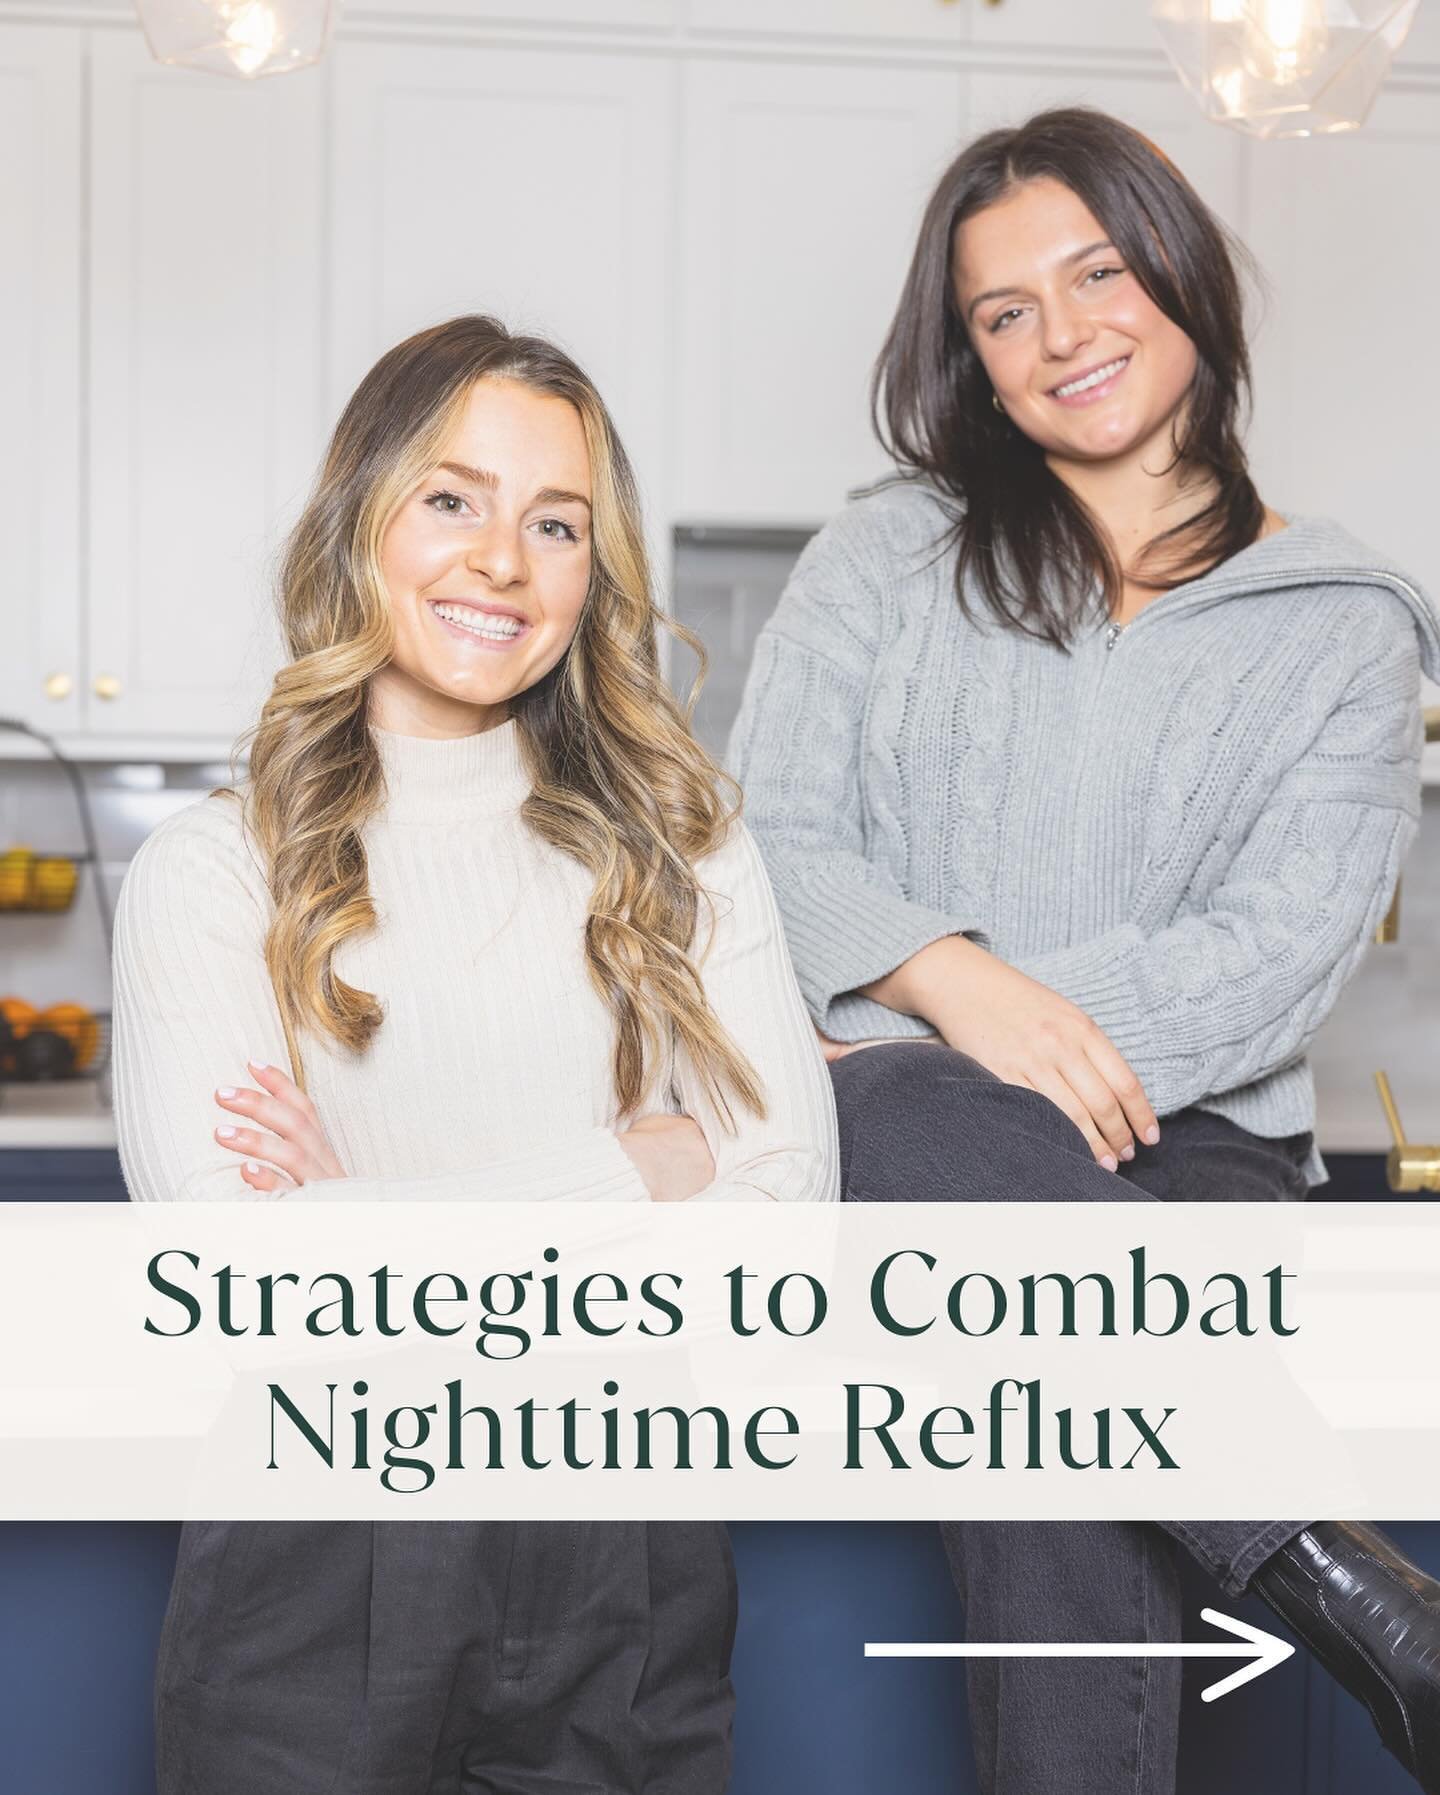 Have you ever noticed that your heartburn, reflux, or LPR symptoms get worse after dinner? Or do you wake up with symptoms of reflux? 💤 

The nighttime is often a problematic time for those with reflux issues such as GERD, LPR, or Lower esophageal s